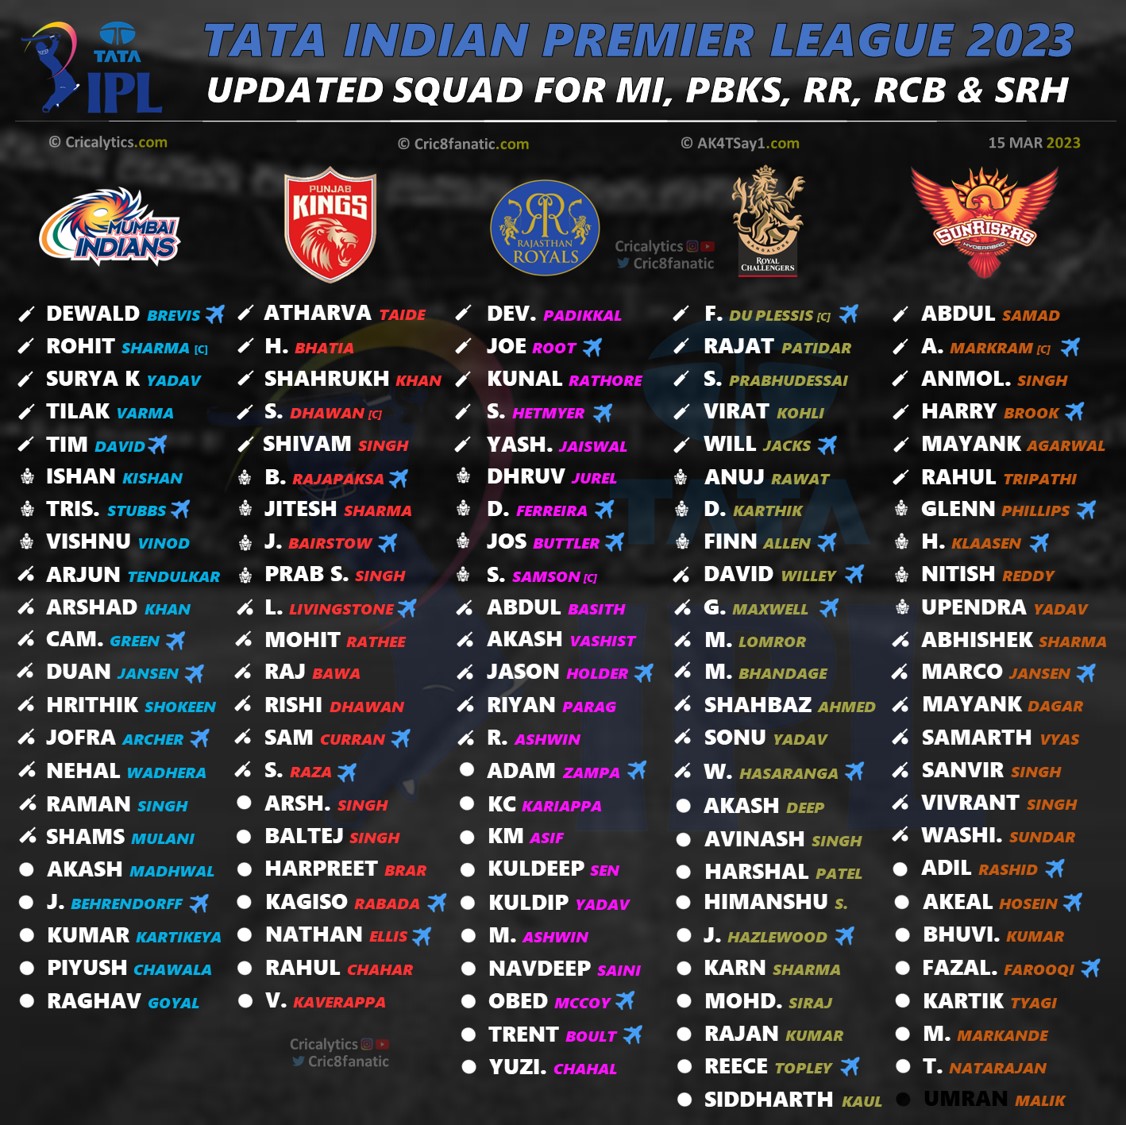 ipl 2023 updated squad players list for all 10 teams